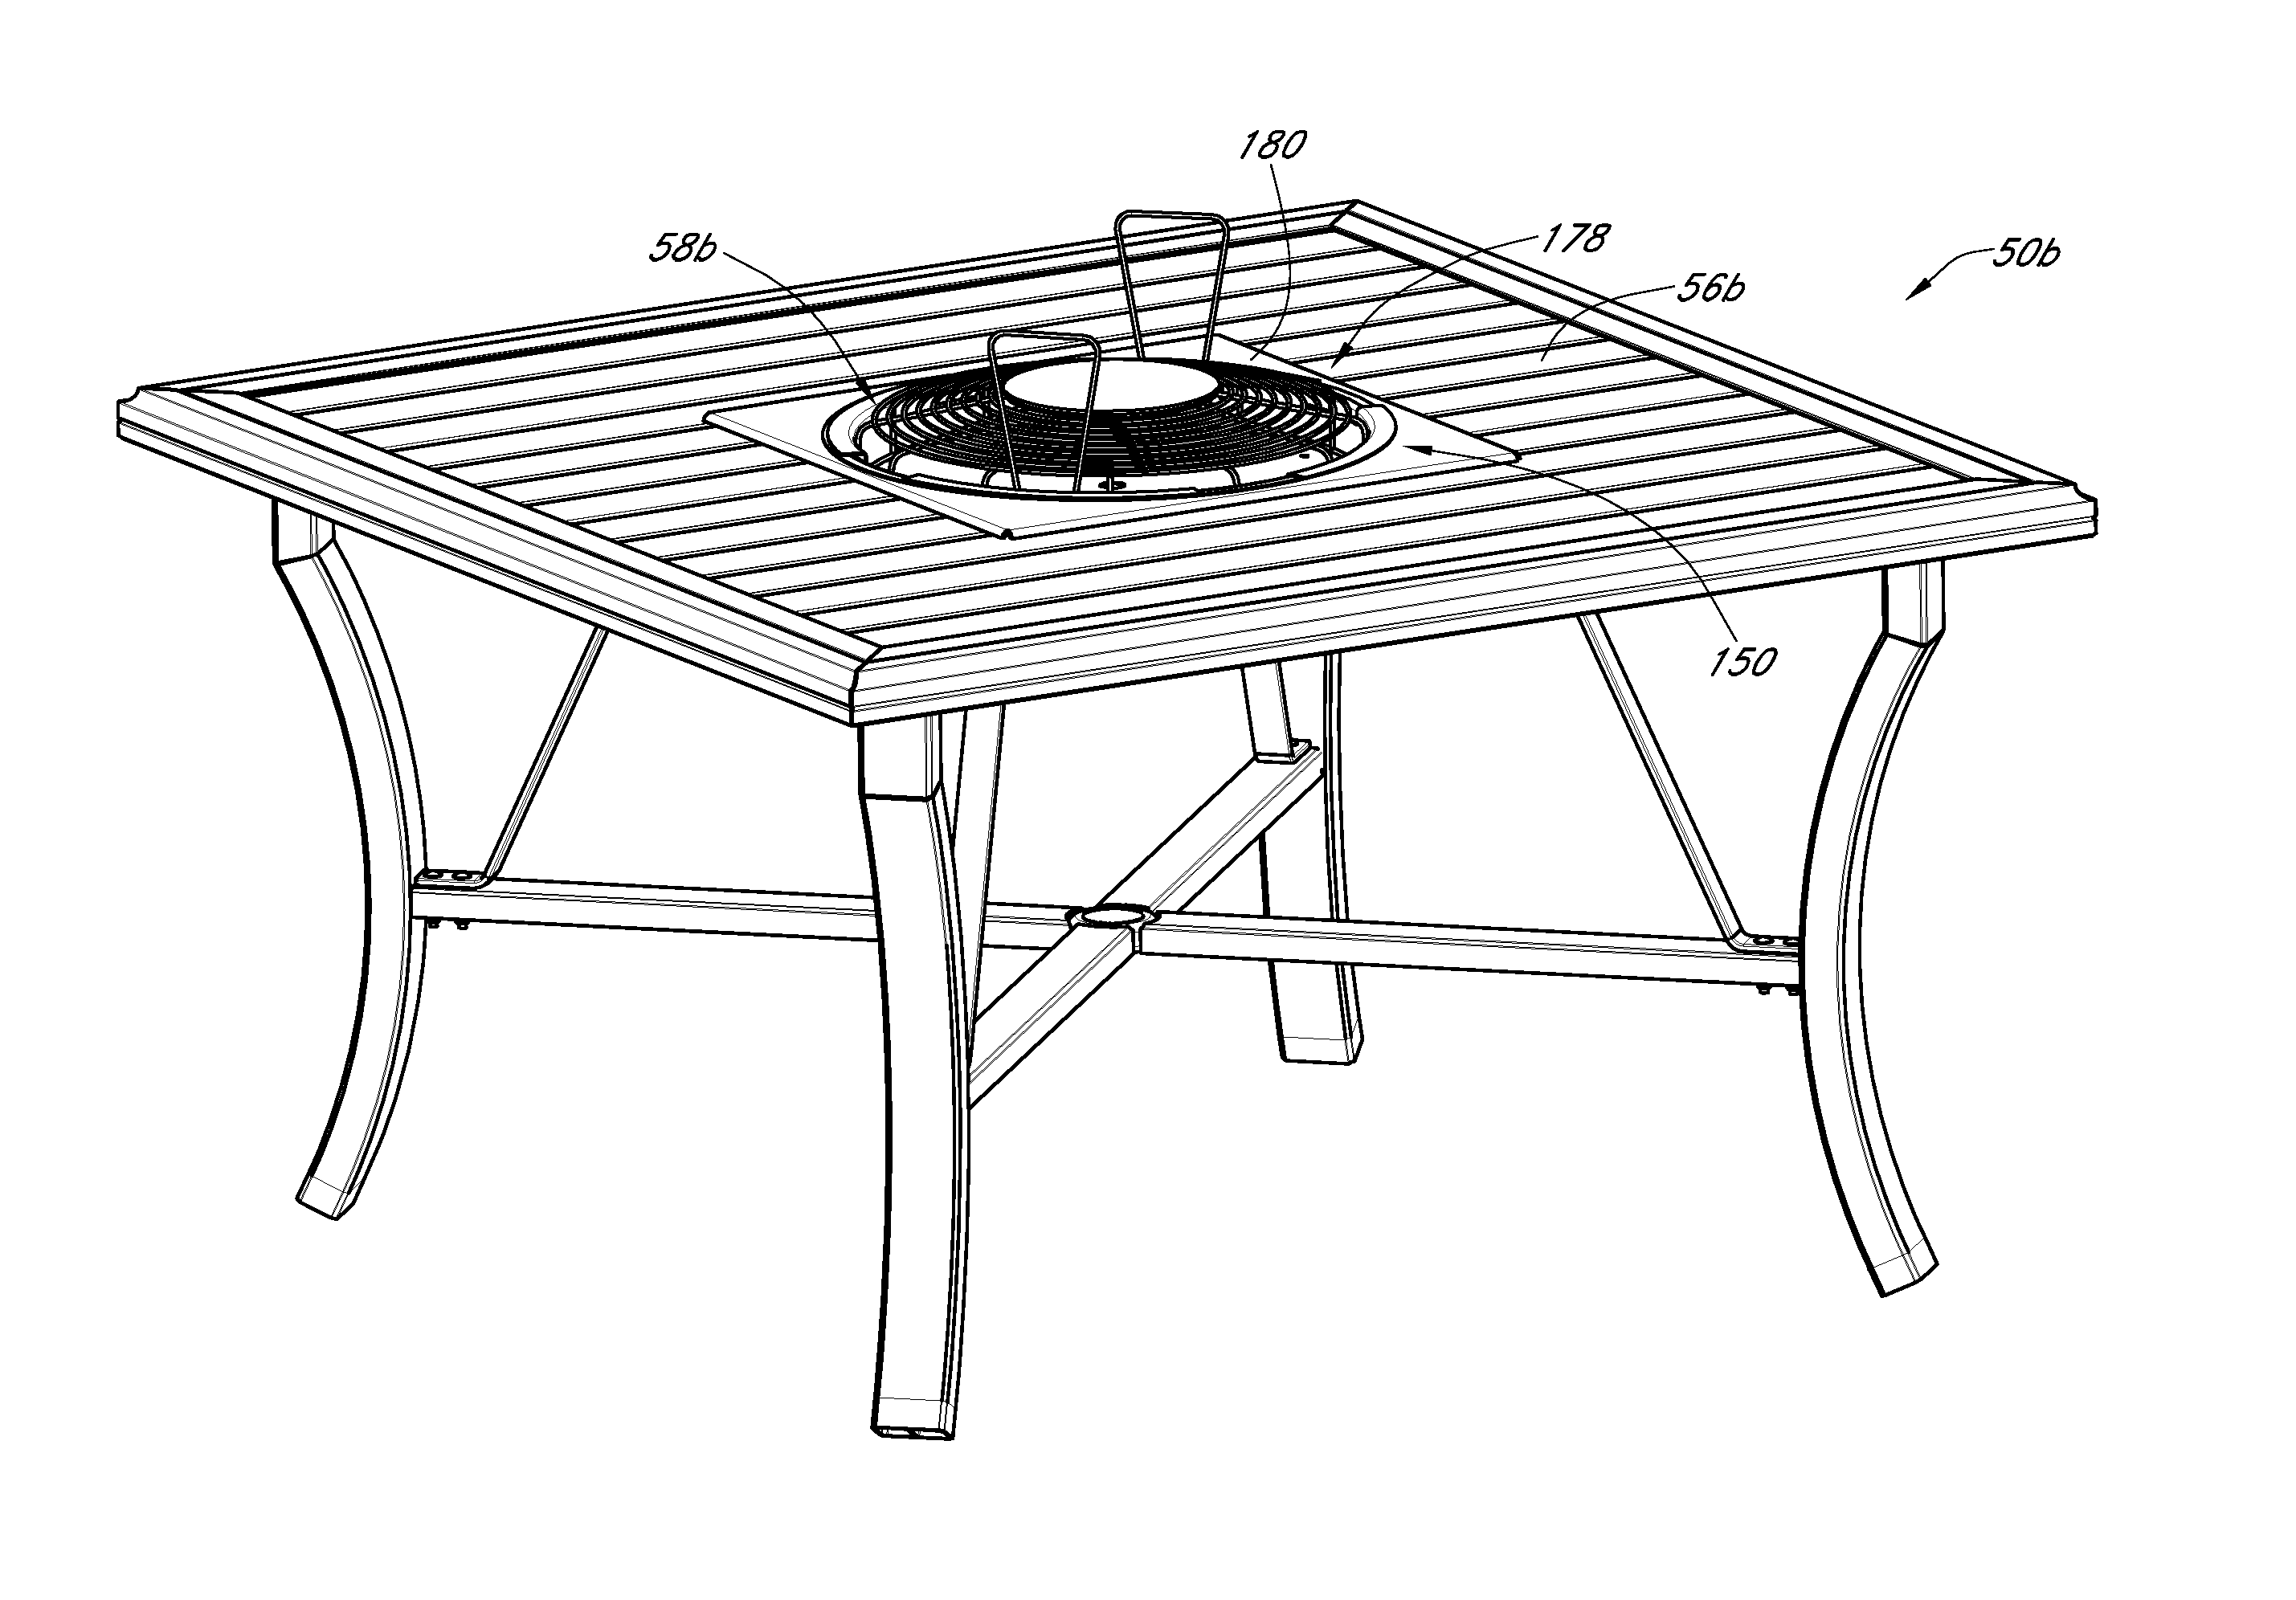 Table and accessories